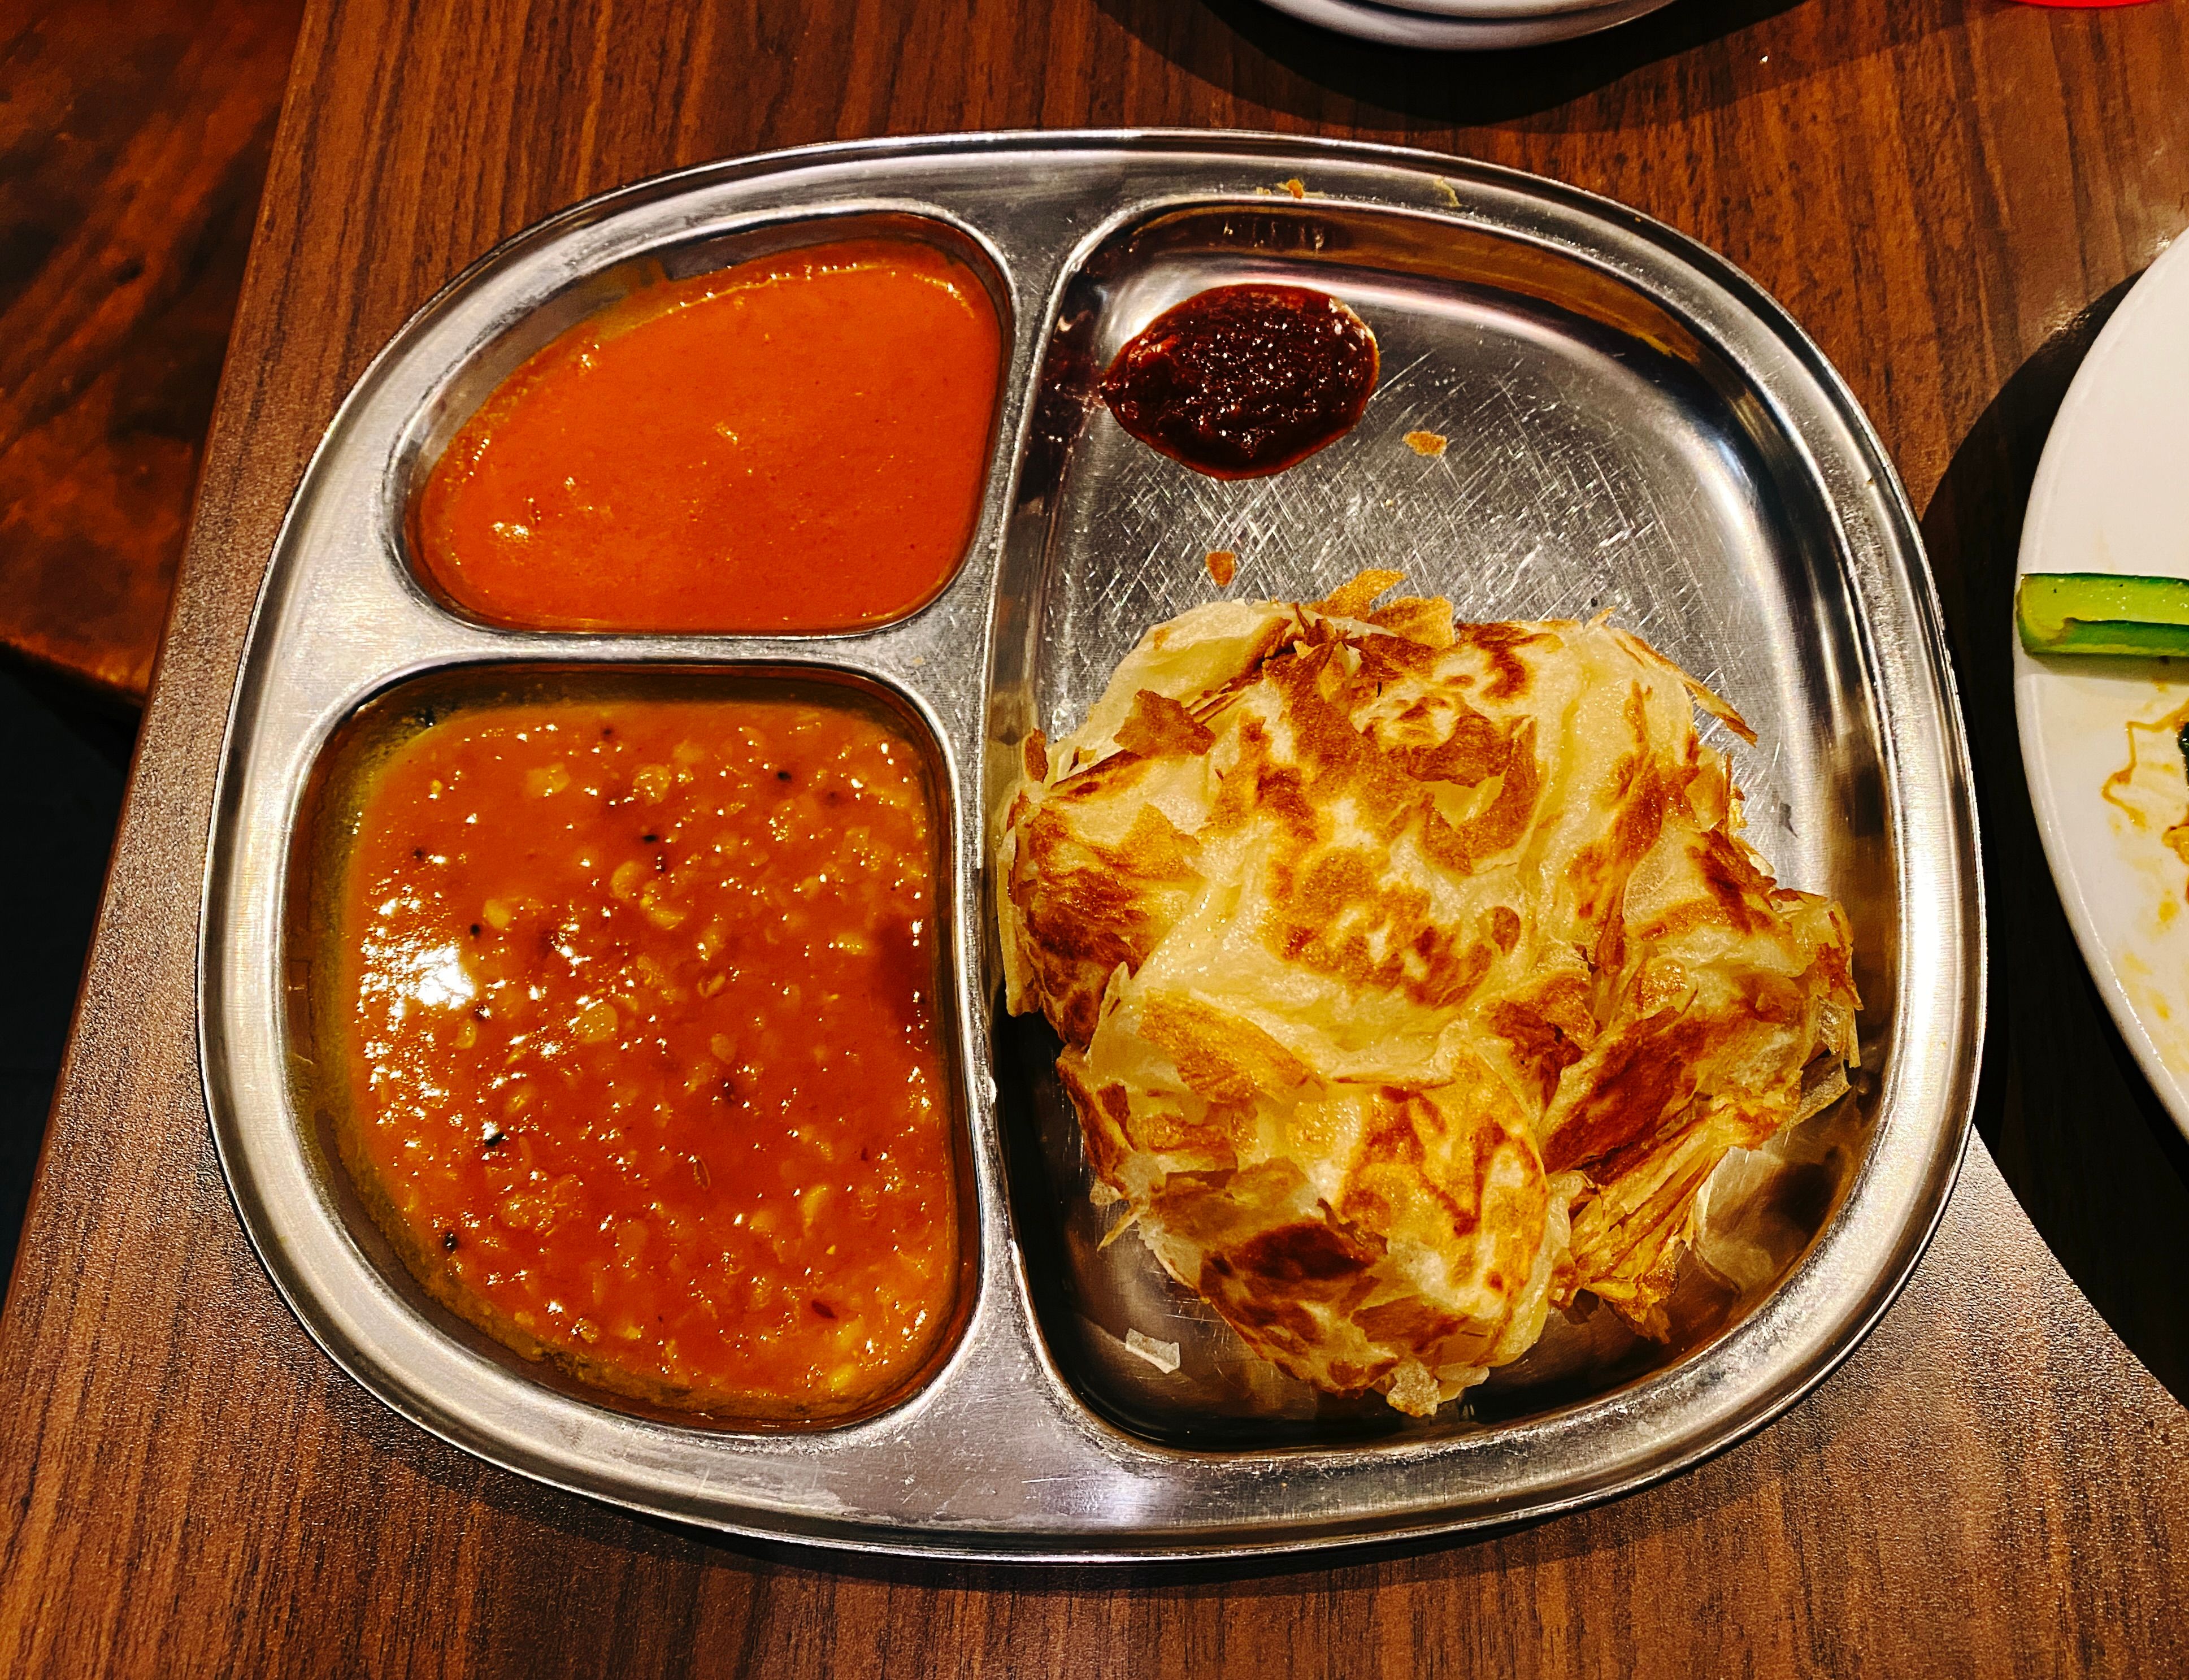 A photo of a roti canai (a flatbread thing except it's all bunched up here) on a metal plate with two different types of curry sauce to dip it into.